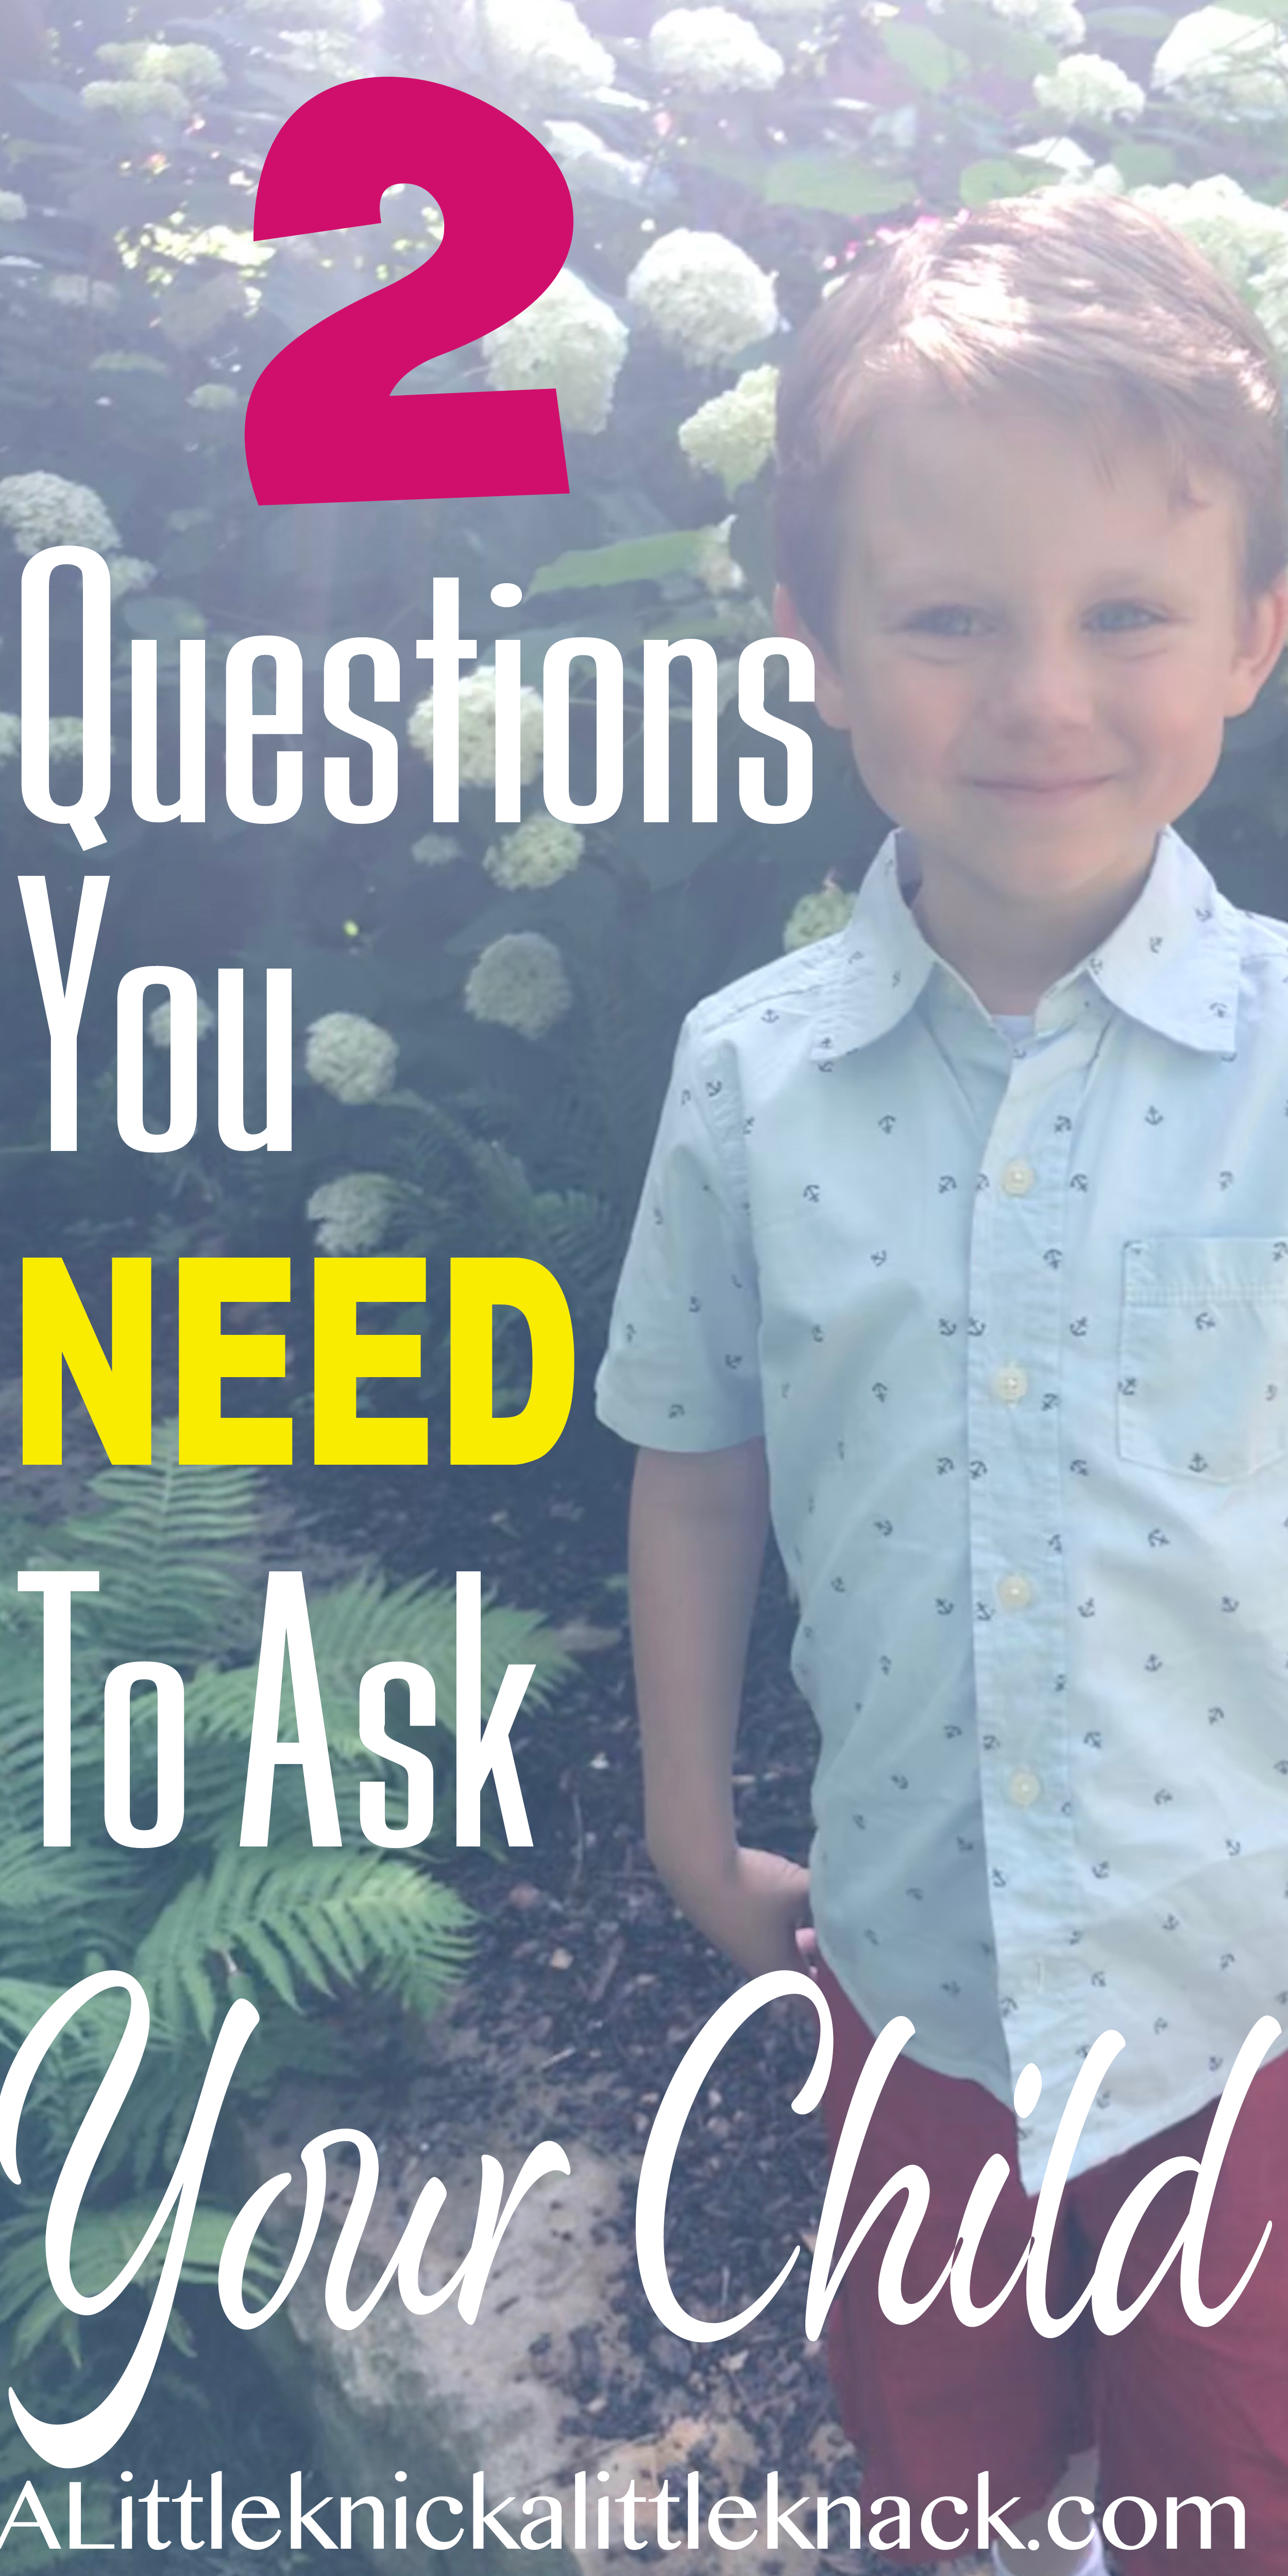 Positive Parenting at it's best! The Two Questions you need to ask your child as a way to teach effective communication skills and build trust.